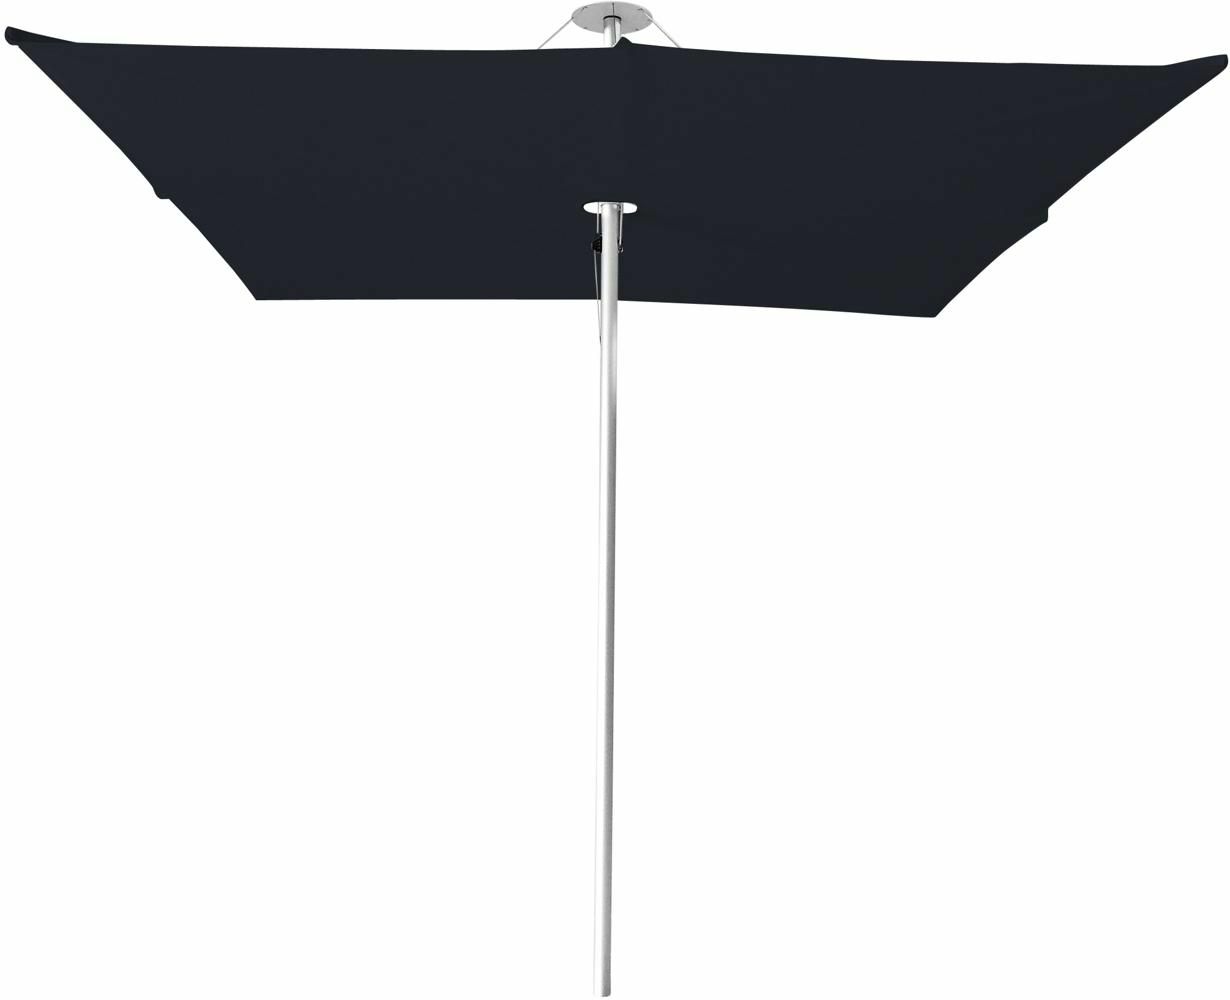 Infina center post umbrella, 2,5 m square, with frame in Aluminum and Solidum Black canopy. 